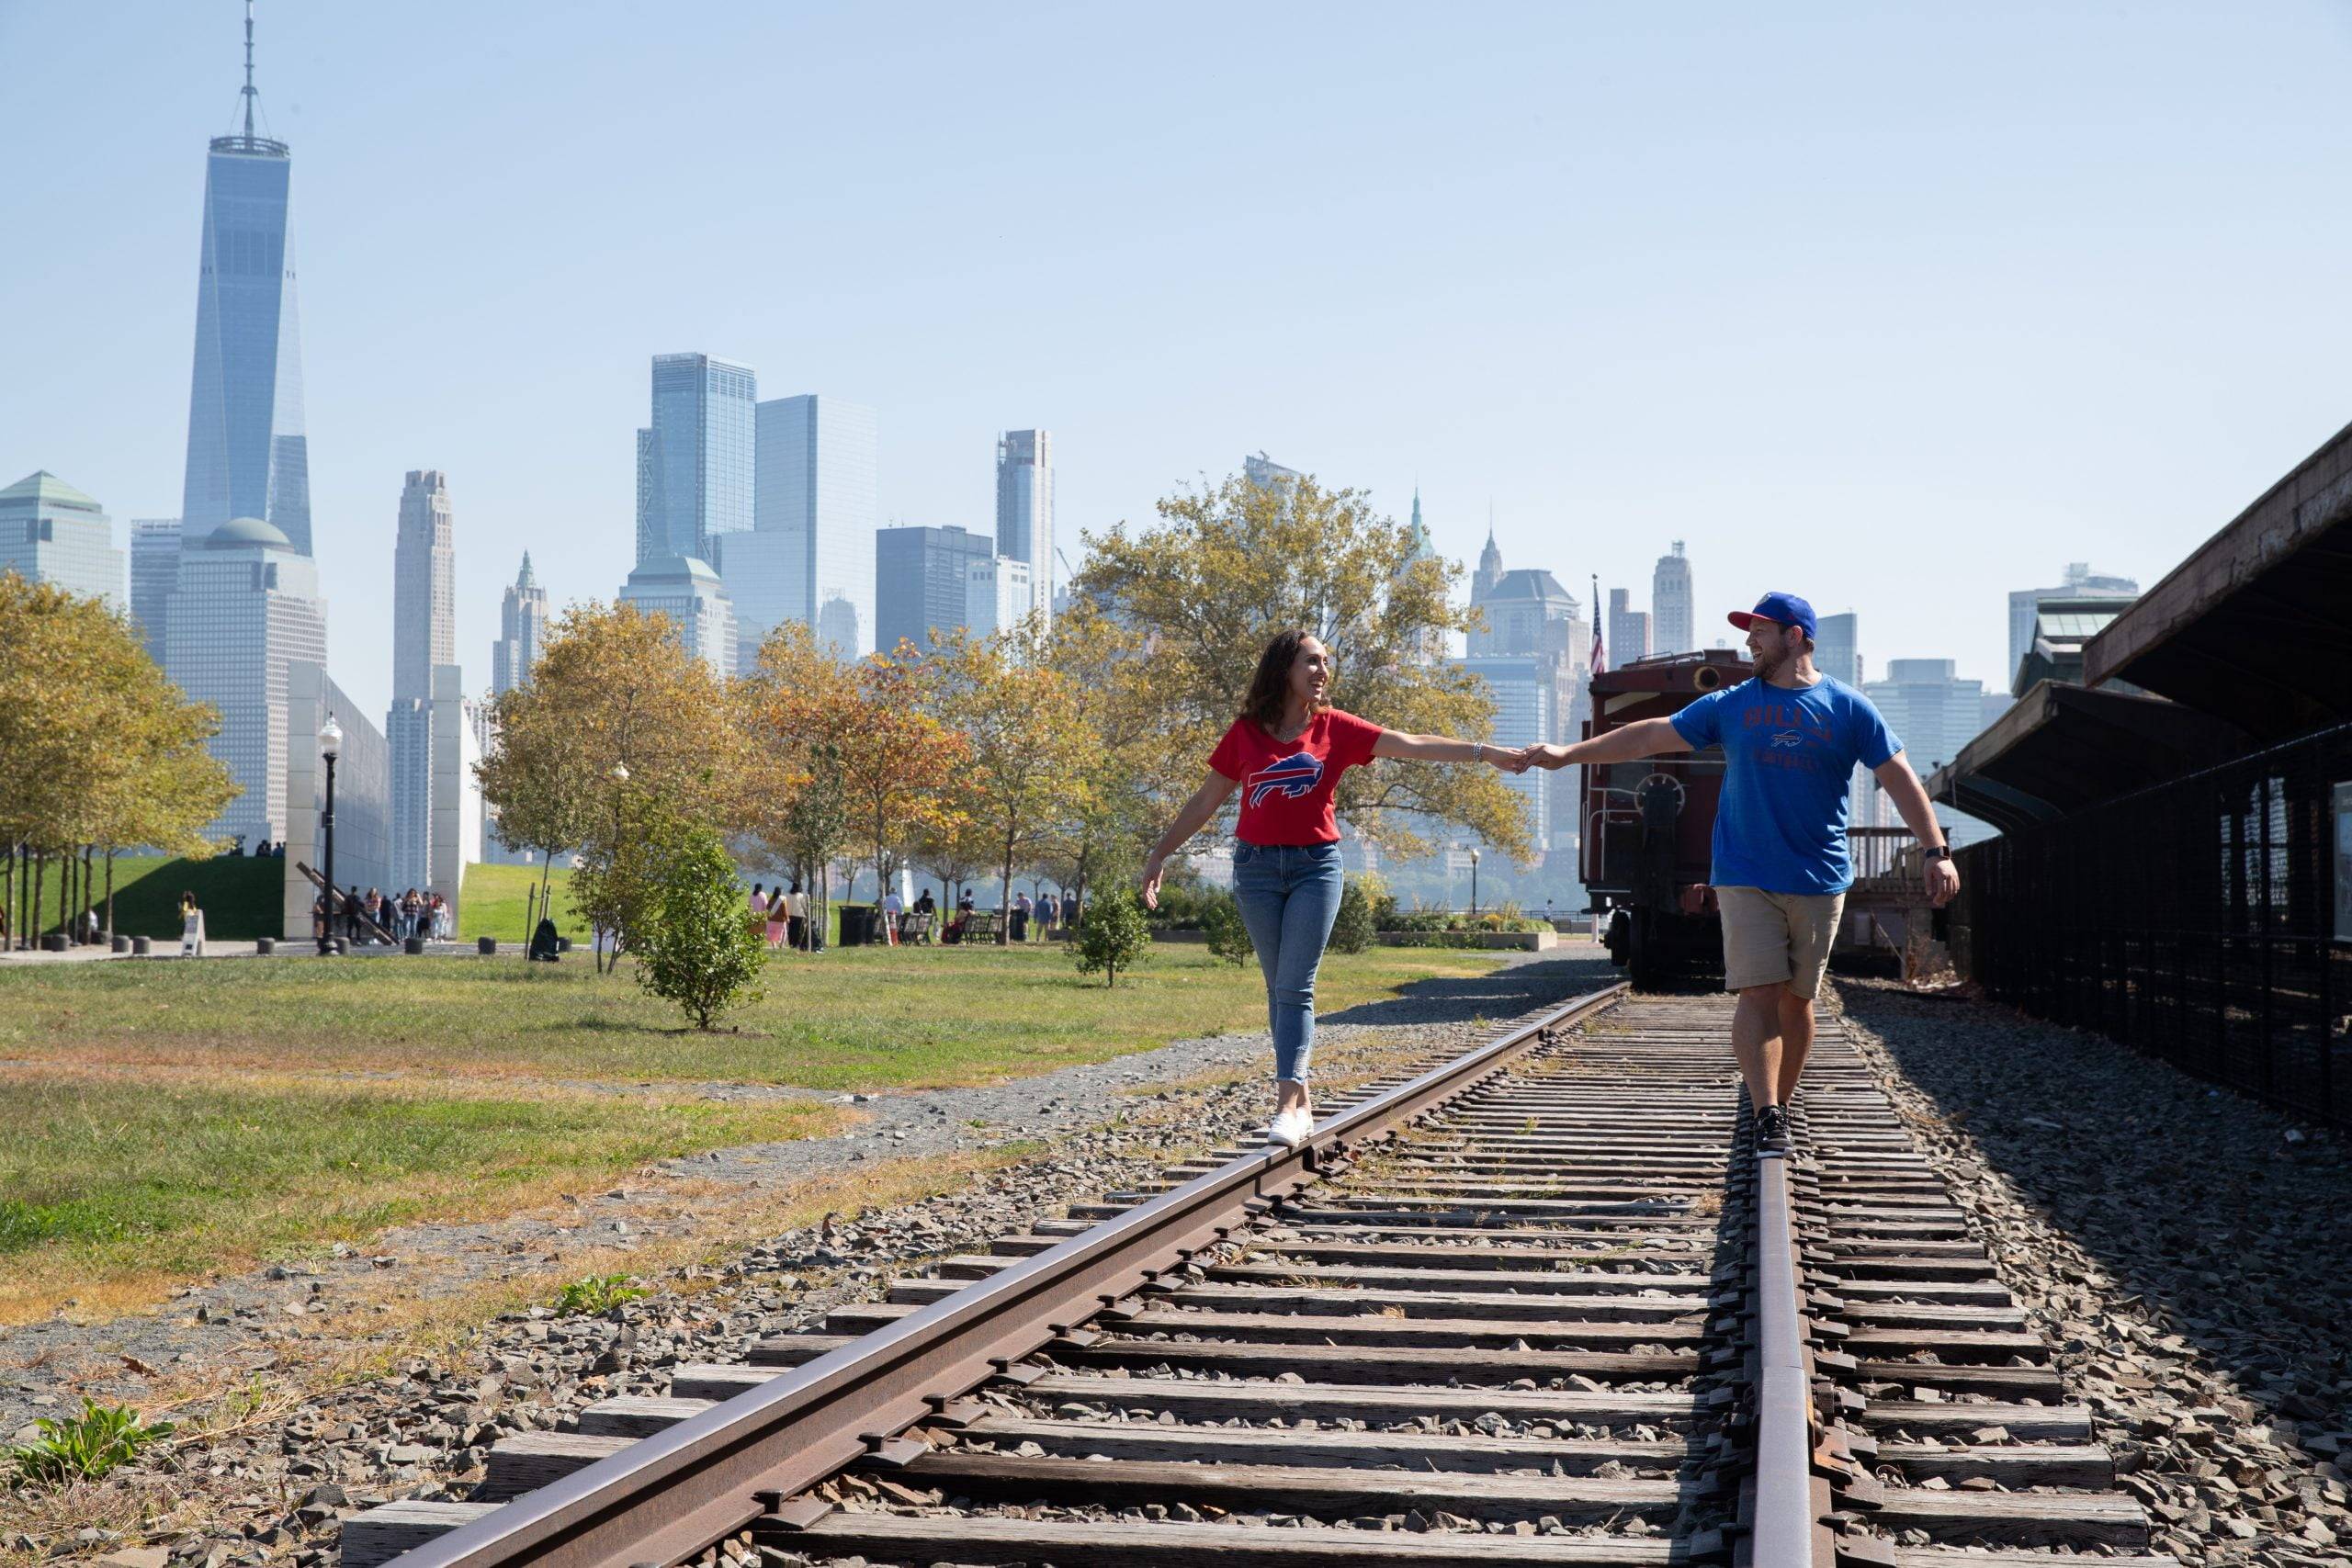 A couple walking on railroad tracks with a city skyline in the background.